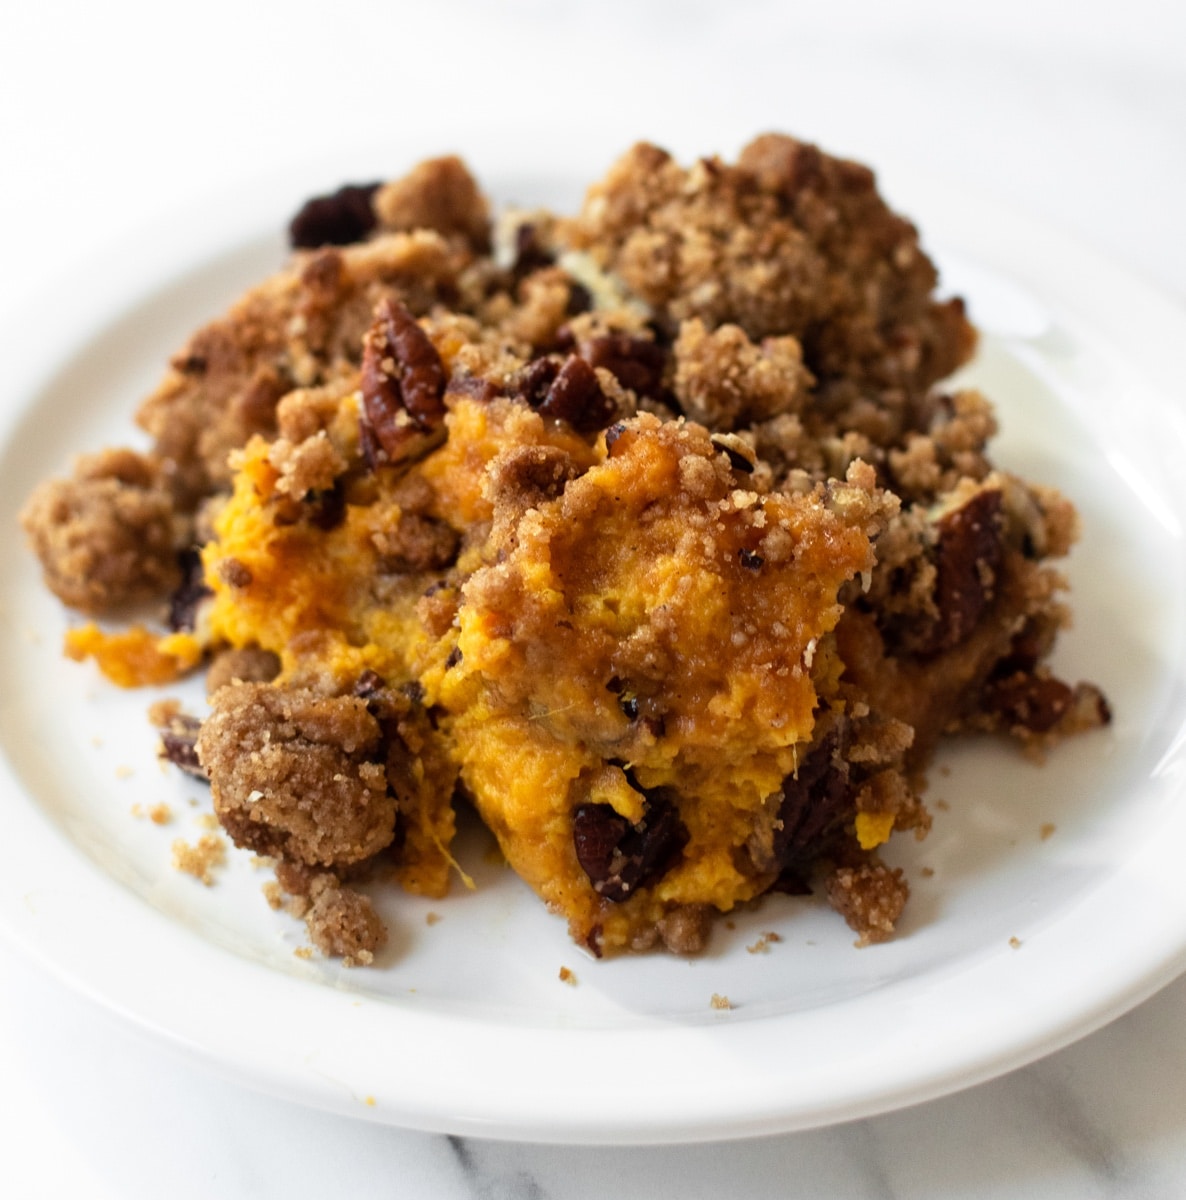 This homemade sweet potato casserole will be a star on your Thanksgiving table— one bite and you'll know why! It's full of flavor, comes together quick and topped with a pecan crumble topping for added crunch.